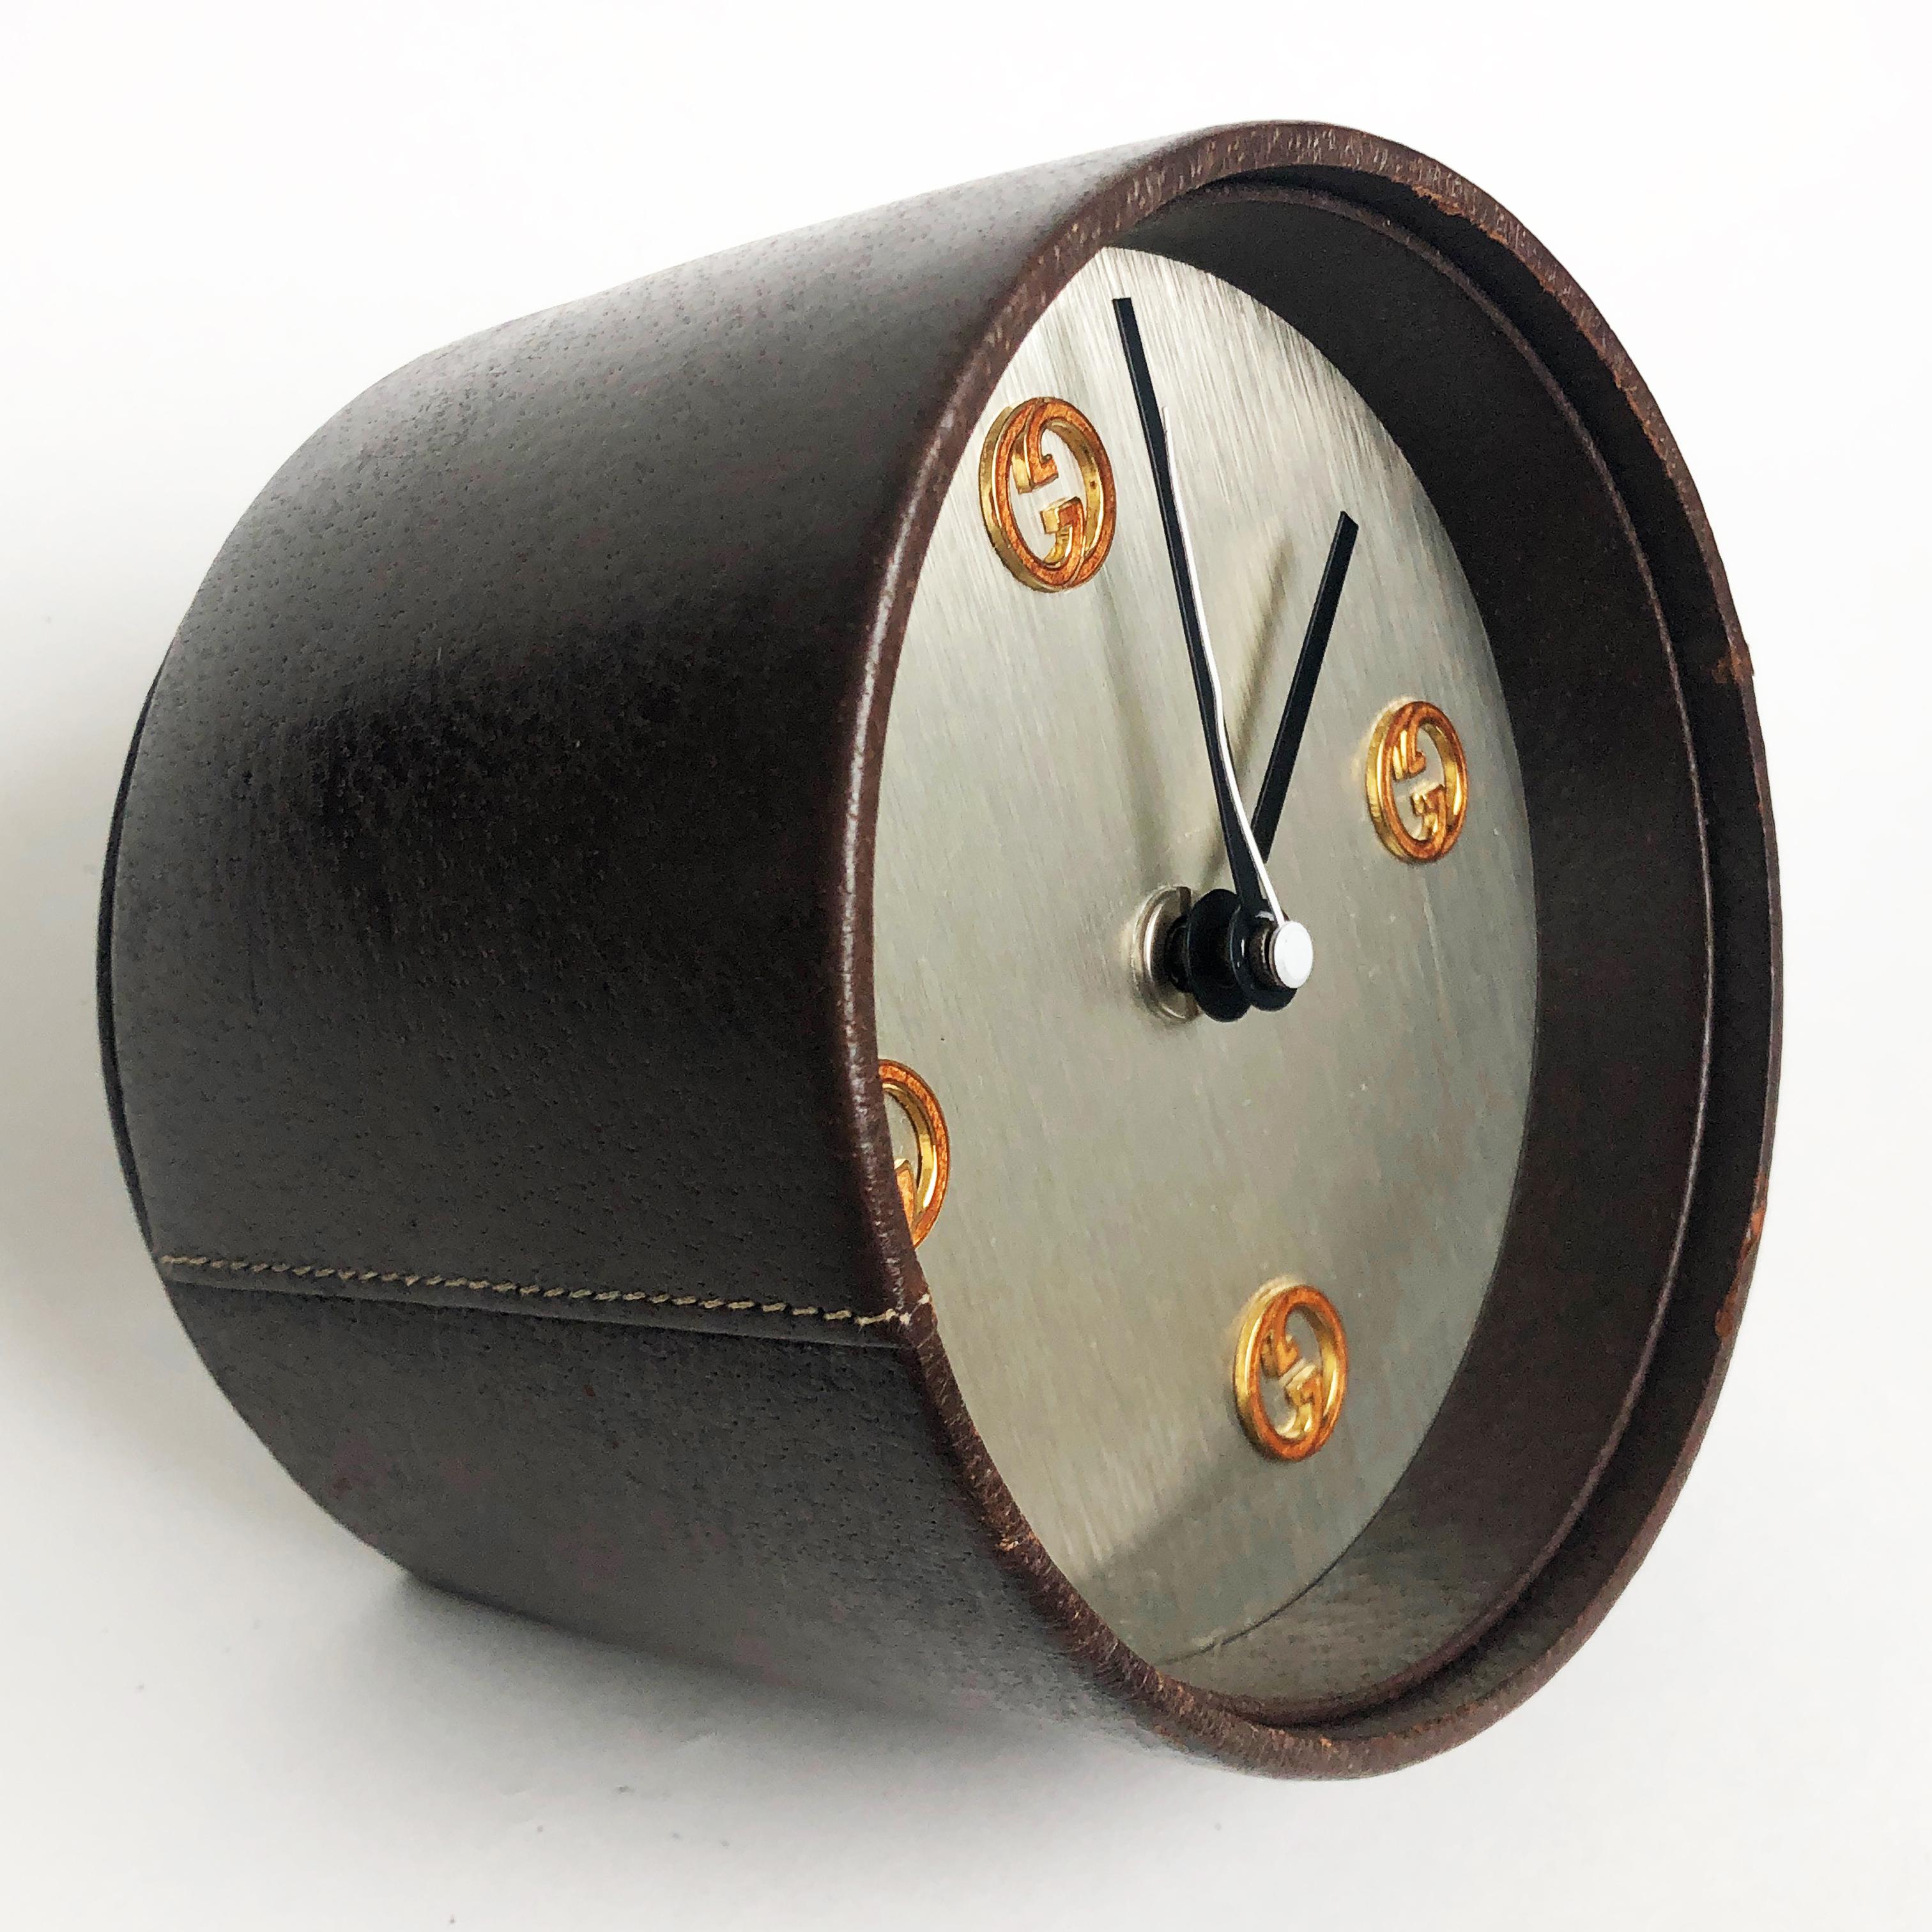 Authentic, preowned, vintage Gucci desk clock, circa the early 1980s. Covered in pigskin leather, with GG logo motif hour markings. This piece originally came with a battery operated movement by well-known German clock maker, KIENZLE, however it was